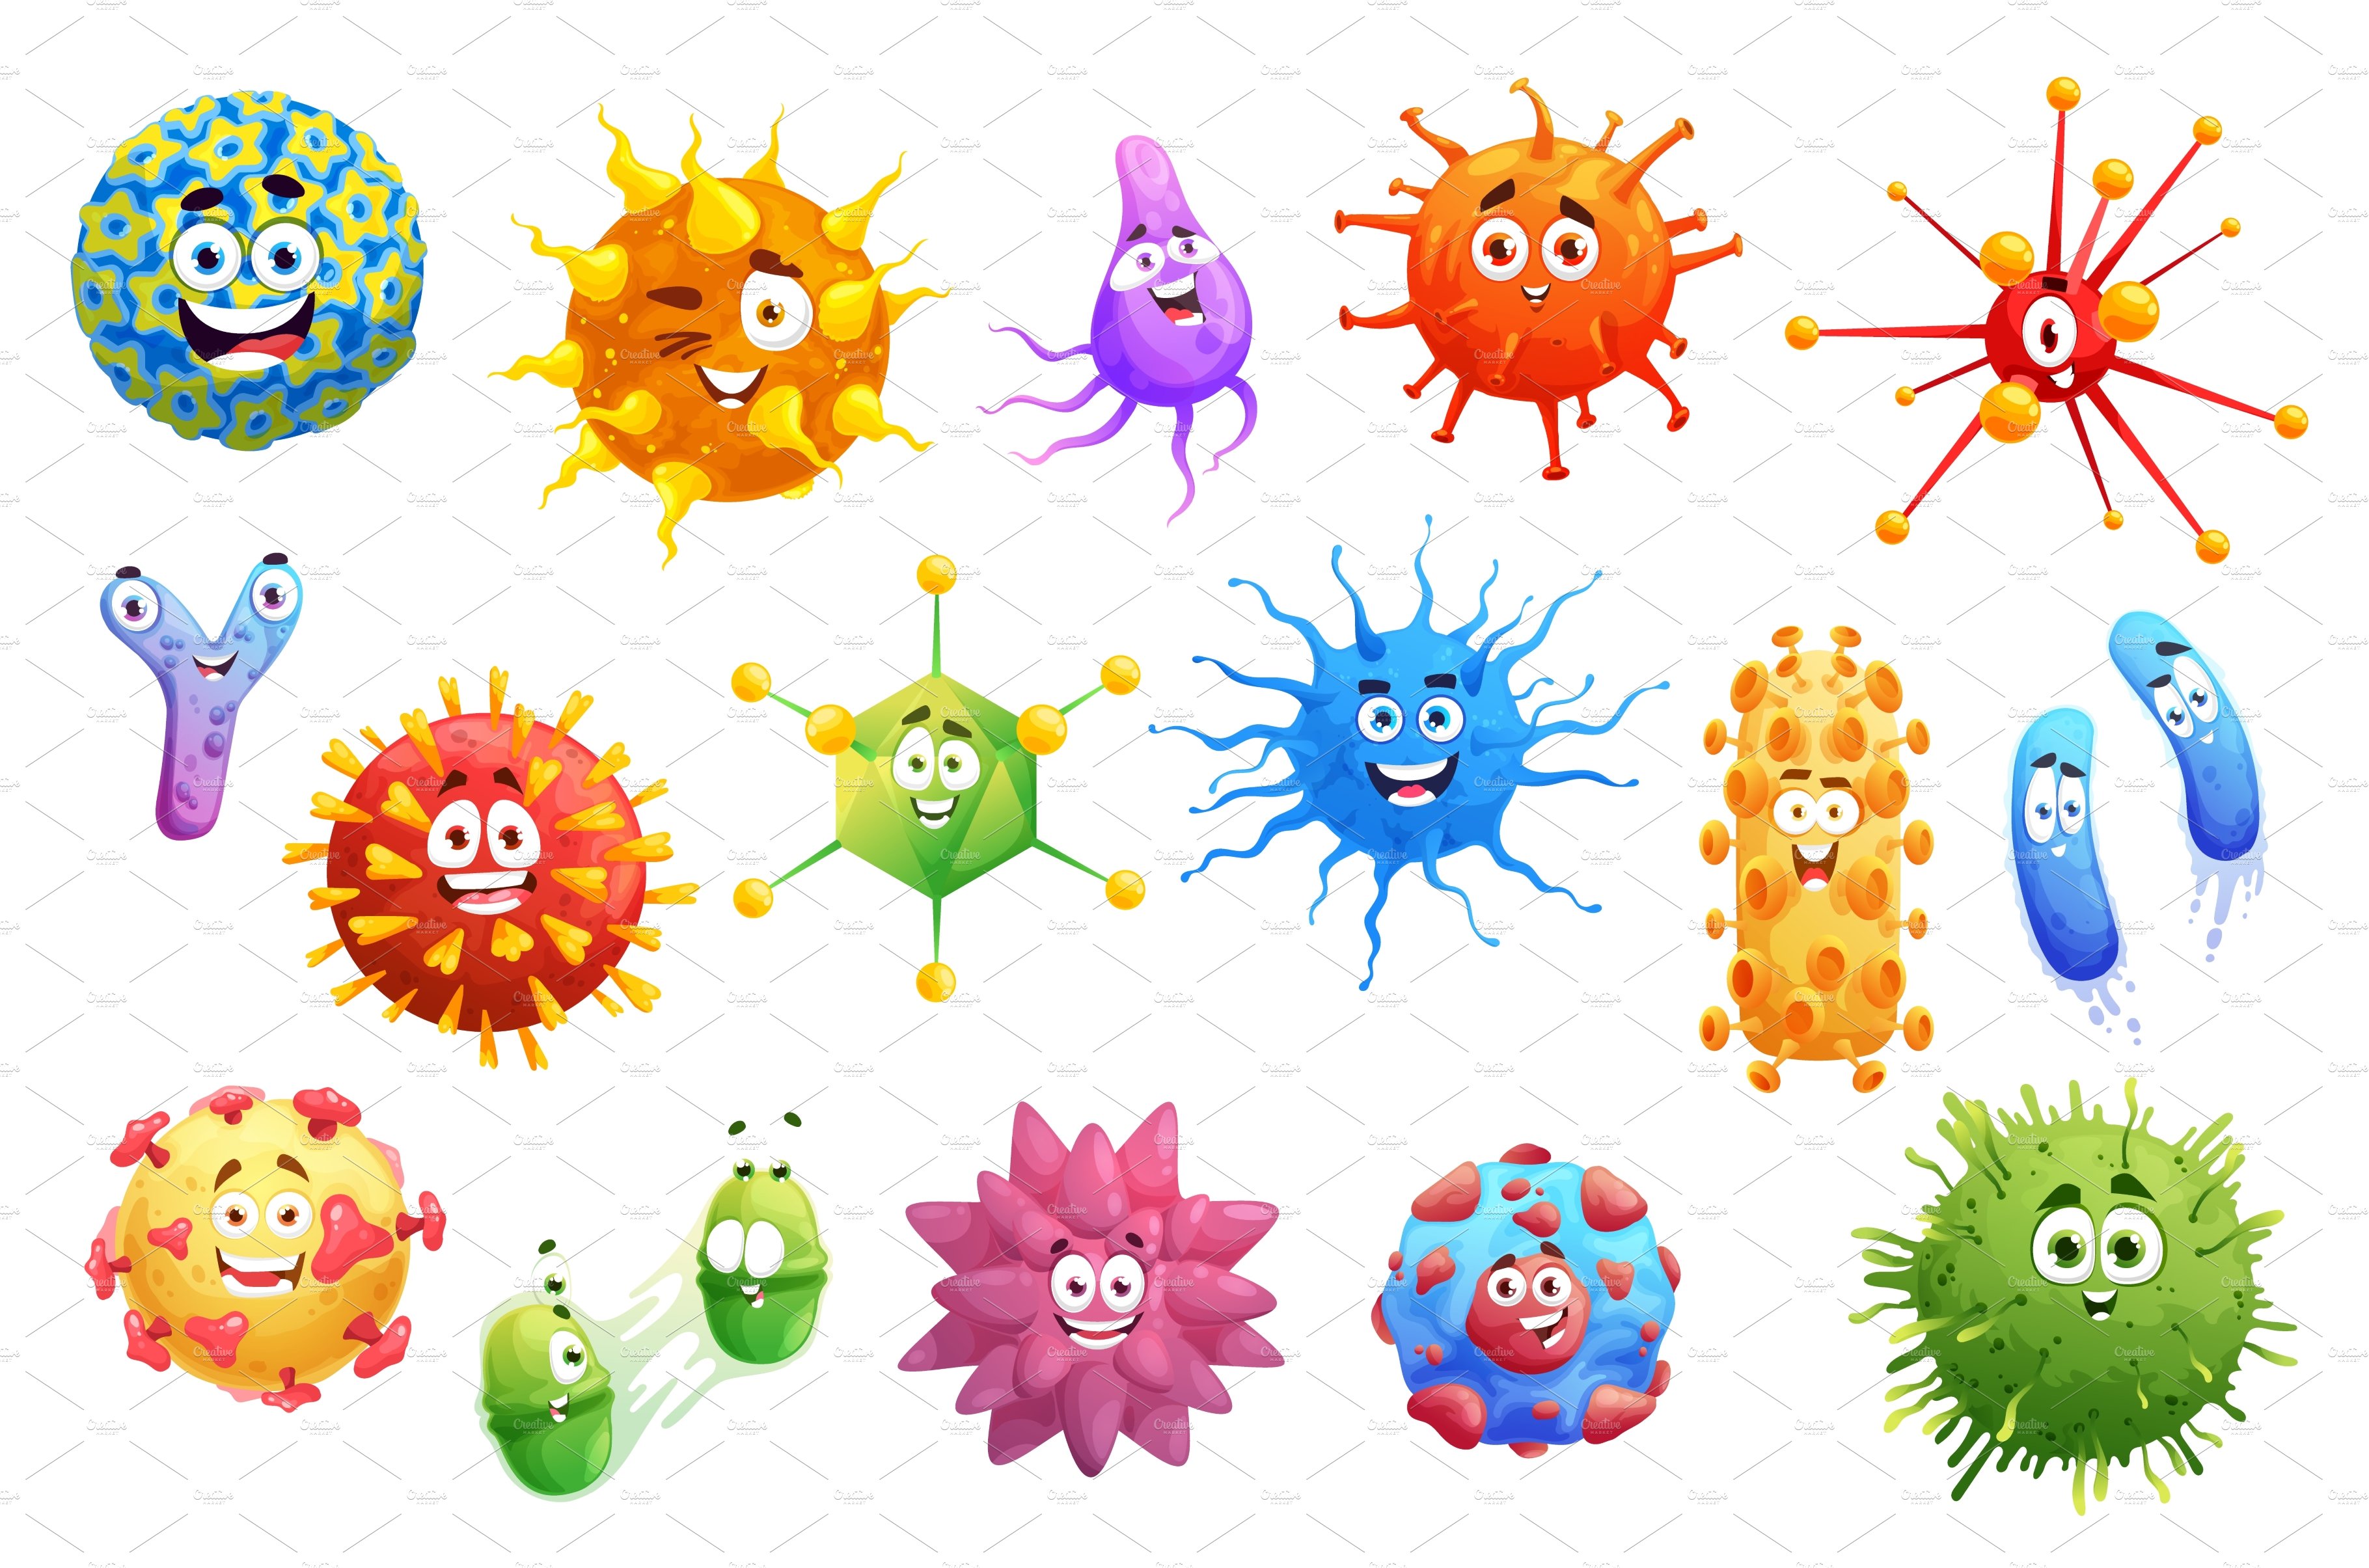 Viruses, microbes and bacteria cover image.